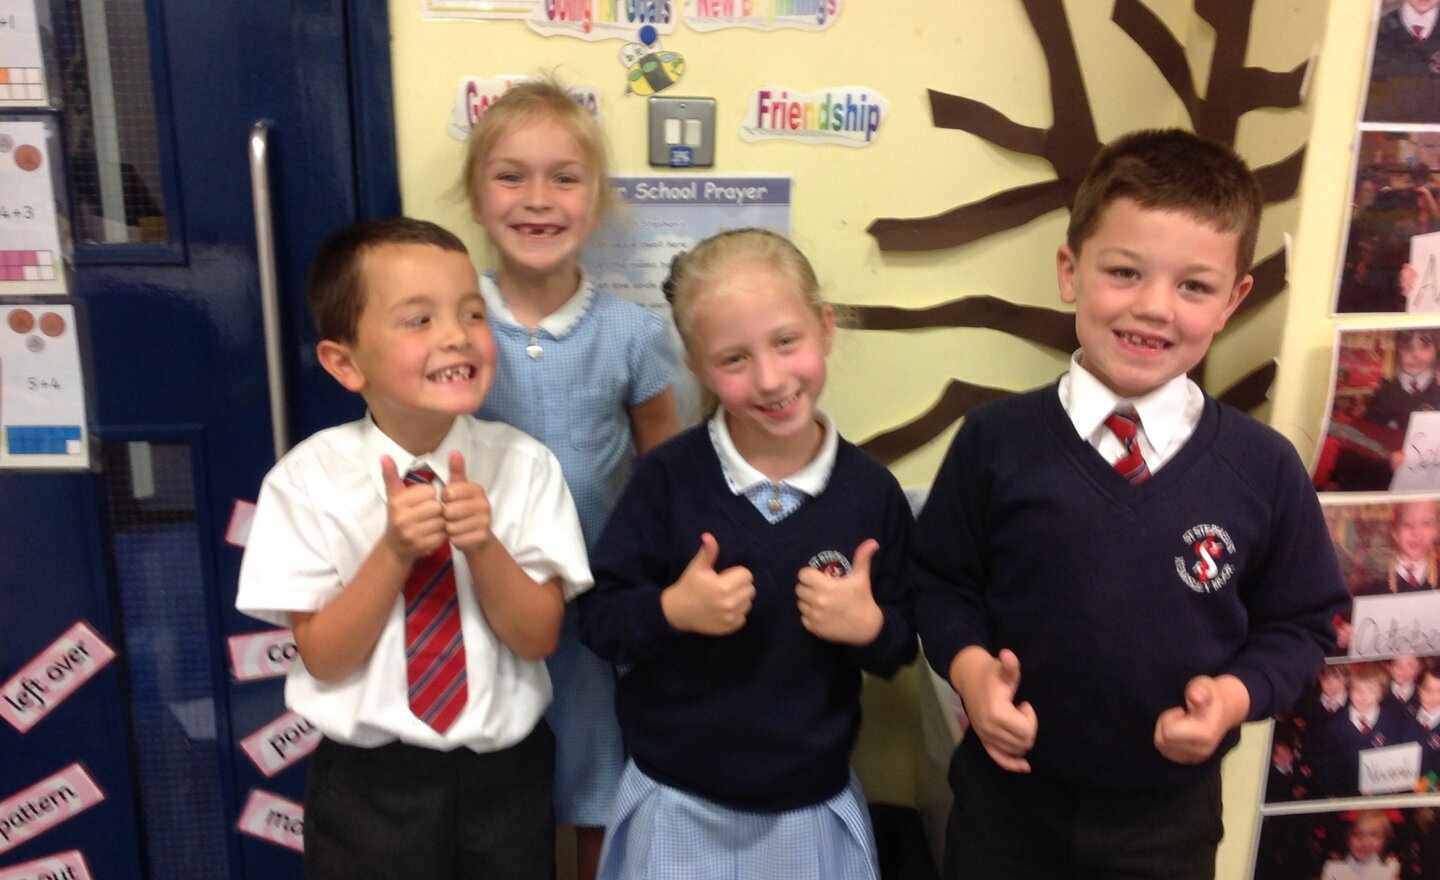 Image of Mad 2 minute maths challenge winners